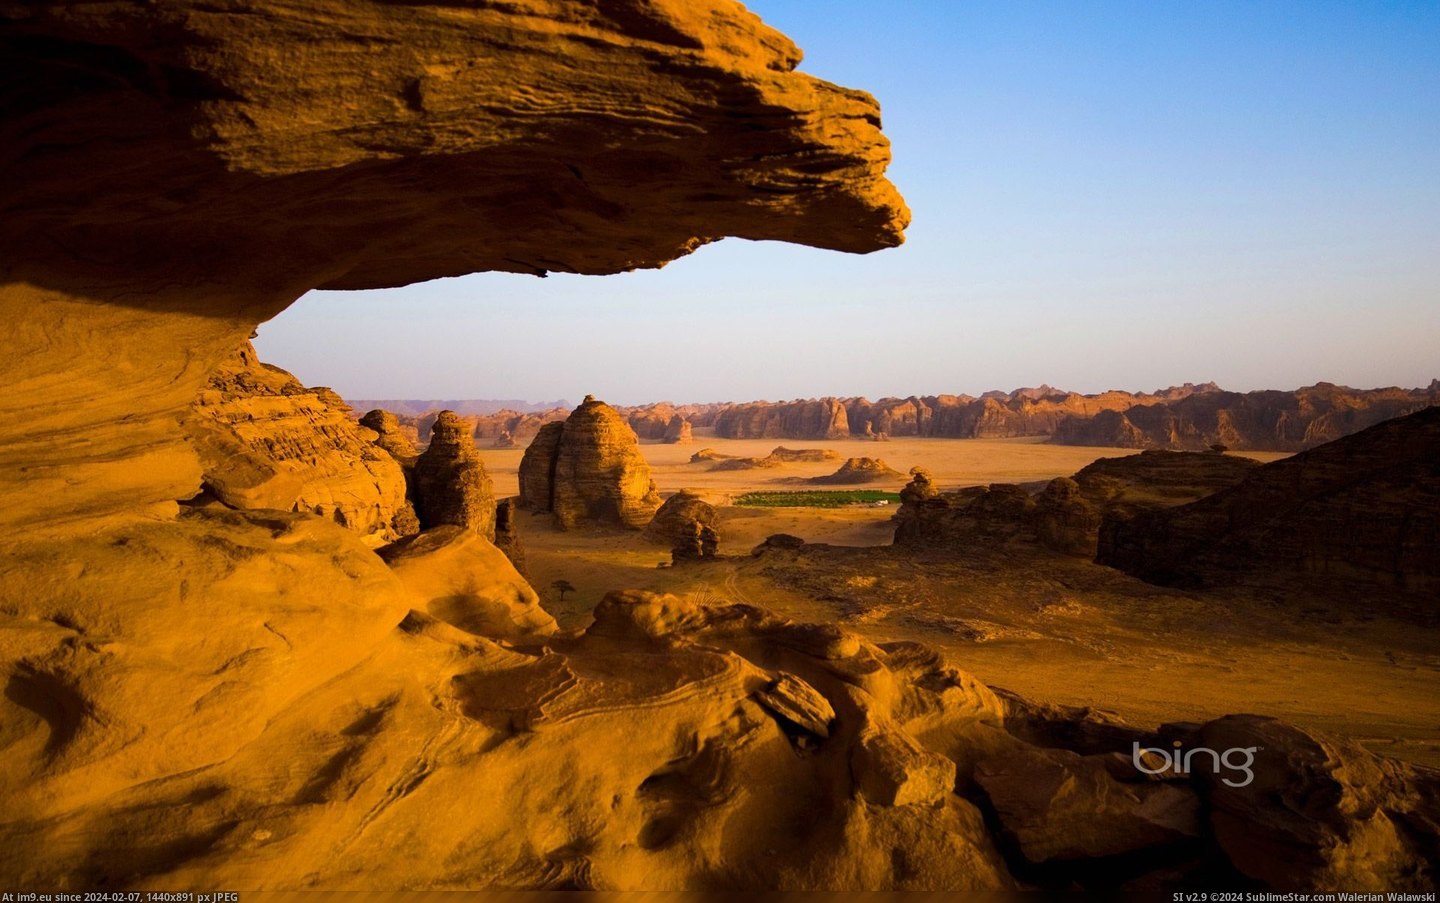 Desert near the oasis city of Al-'Ula, Saudi Arabia (Gallo Images - Getty Images) 2013-03-24 (in Best photos of March 2013)